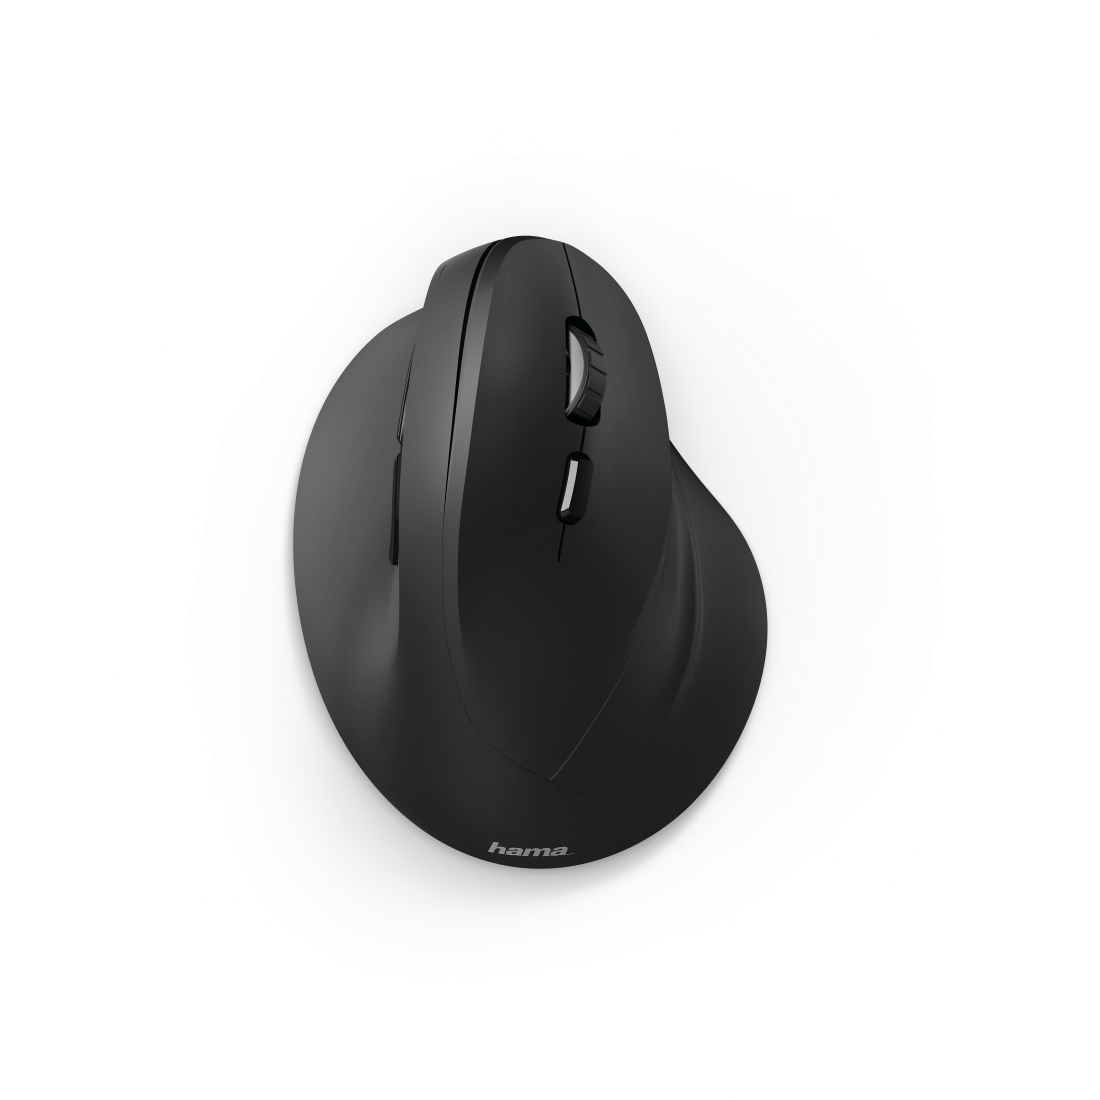 You Recently Viewed Hama Ergonomic EMW-500 Vertical 6-Button Wireless Mouse Image